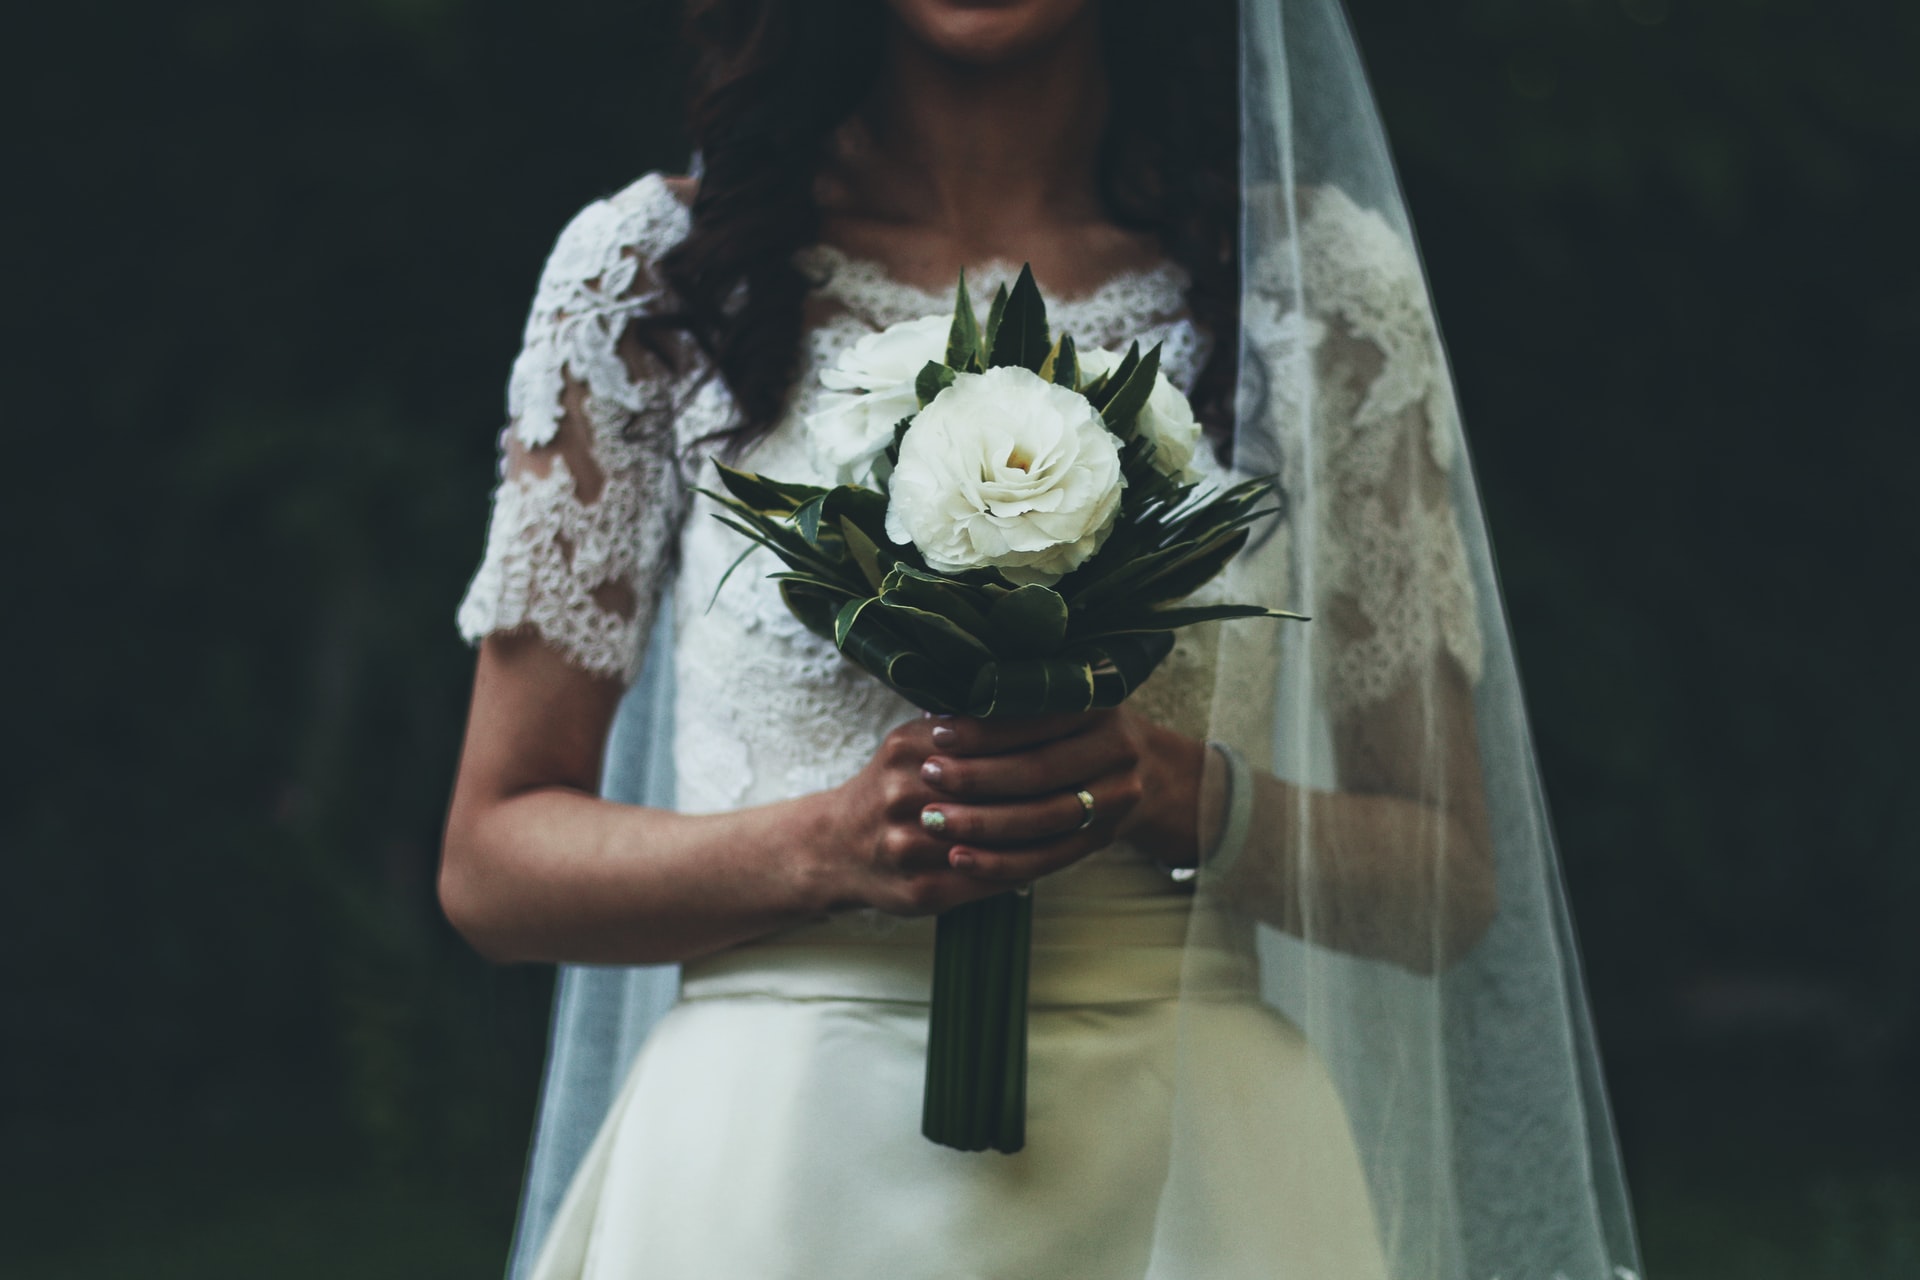 7 Important Services You have to Look For When Hiring Wedding Photographers